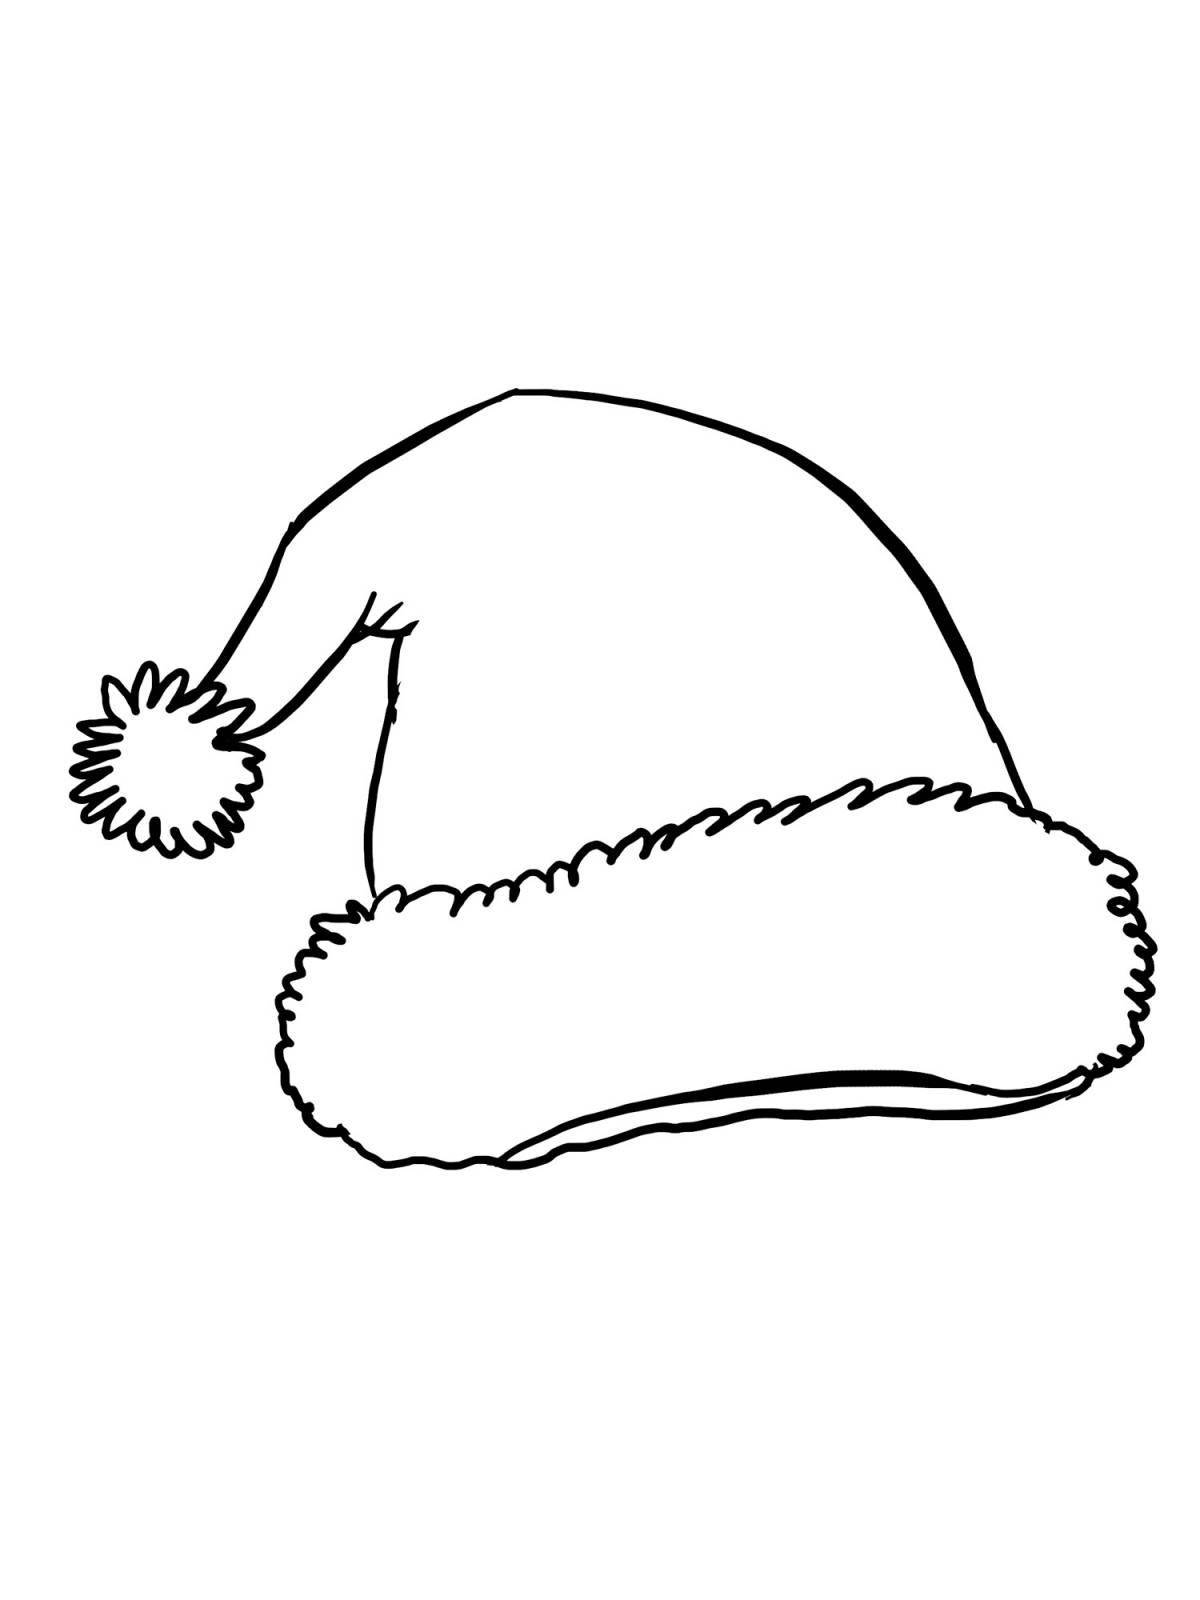 Adorable hat coloring book for 4-5 year olds